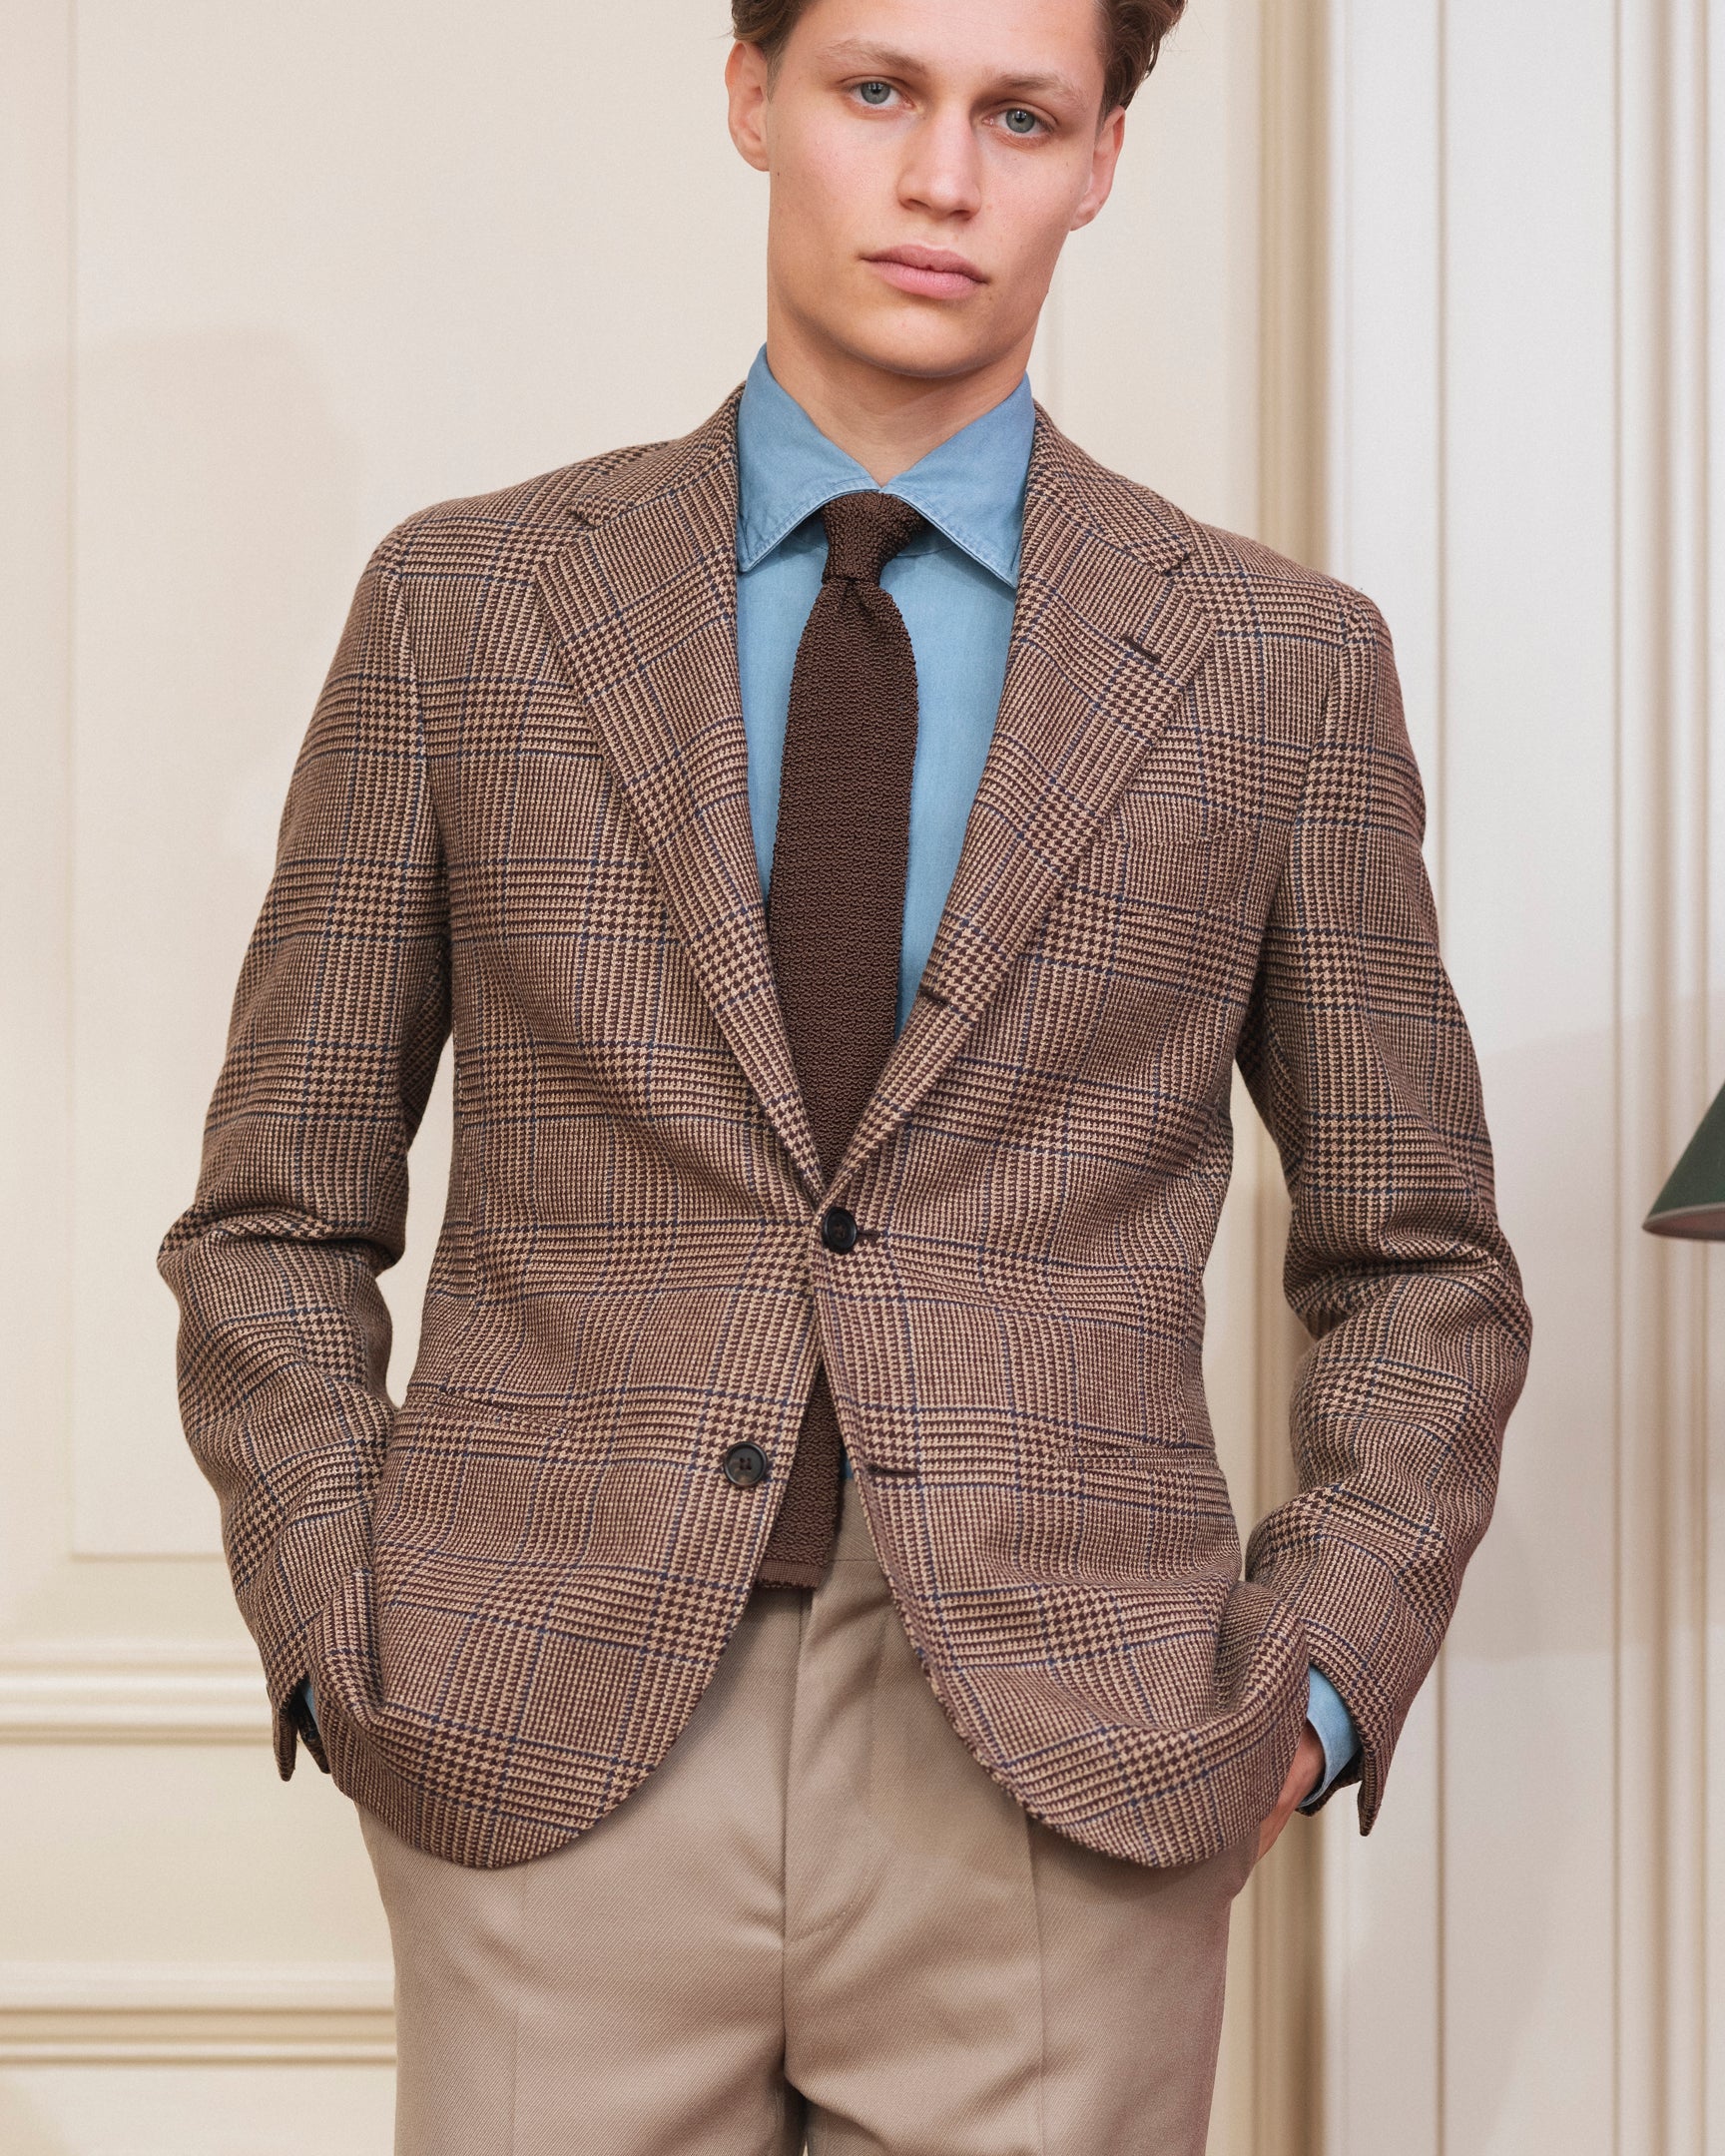 Man wearing a brown tweed prince of wales check sport coat, beige cavalry twill trousers, denim shirt and brown knitted silk tie